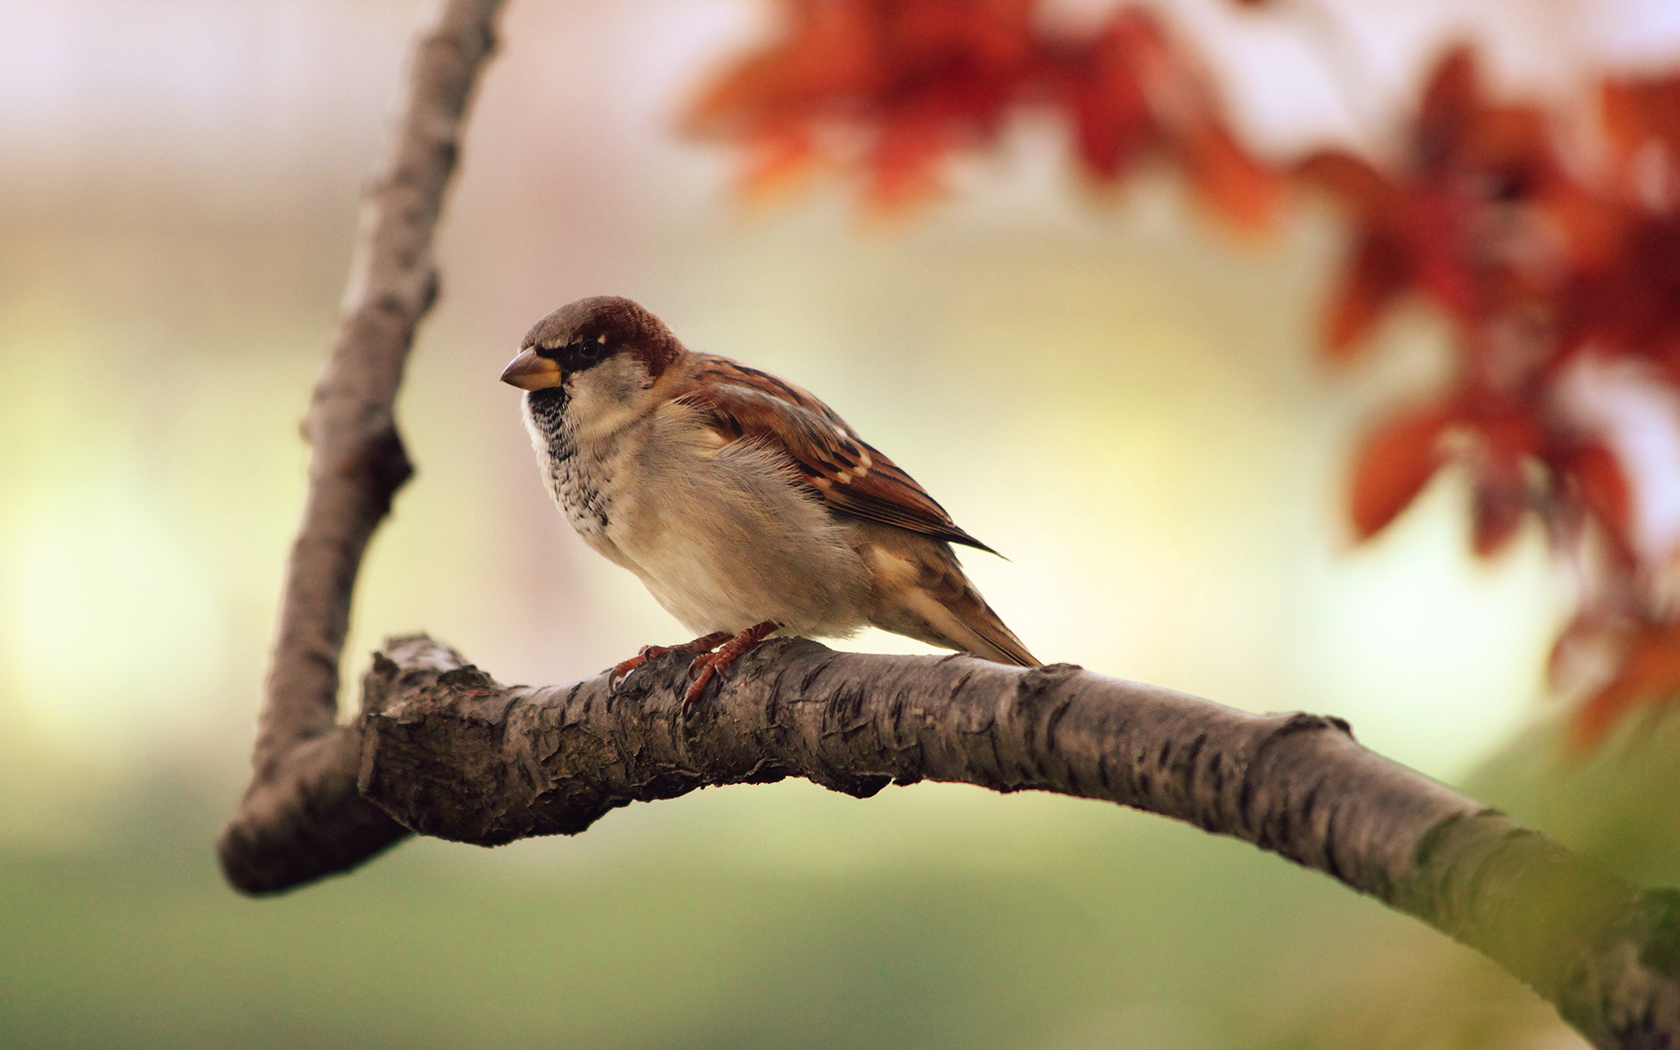 General 1680x1050 birds branch animals blurred nature Passer domesticus house sparrow sparrow